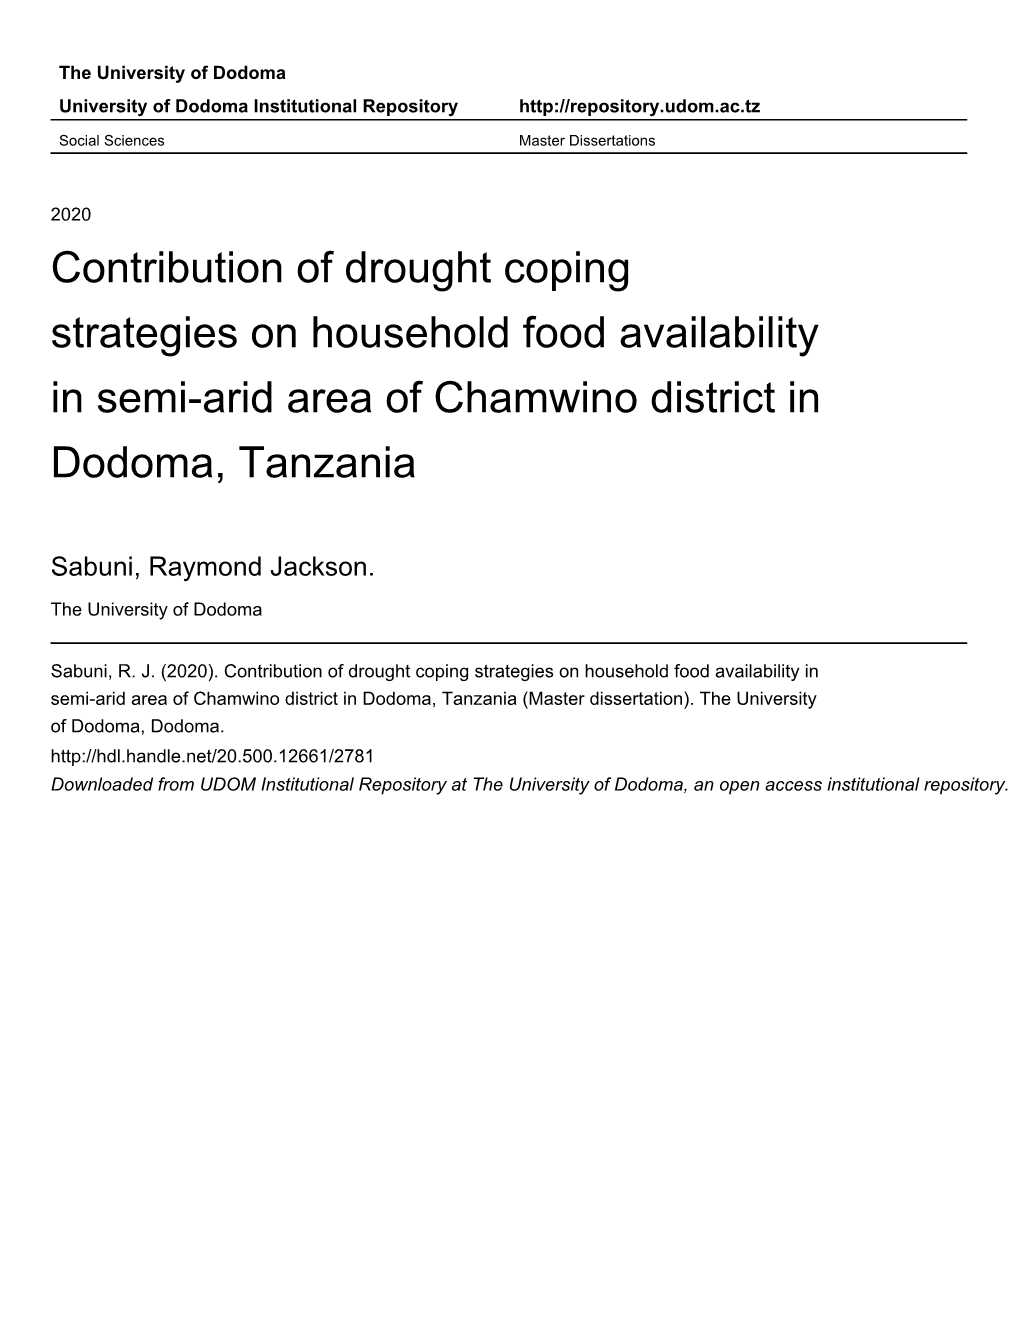 Contribution of Drought Coping Strategies on Household Food Availability in Semi-Arid Area of Chamwino District in Dodoma, Tanzania